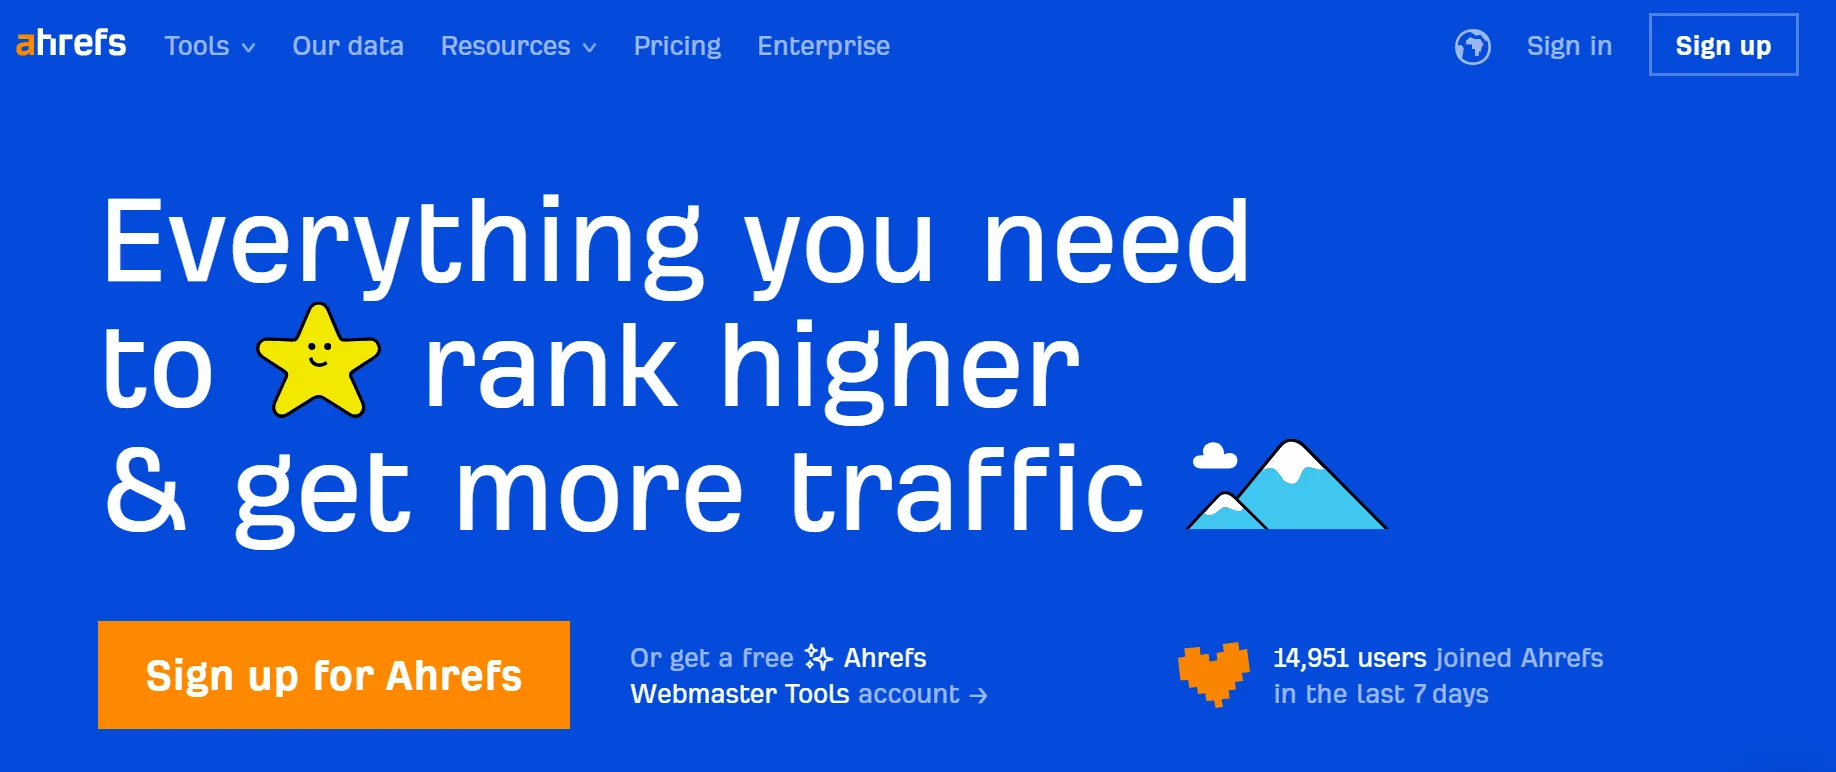 The landing page of Ahrefs SEO and PPC platform that can provide great insights for an Amazon keyword strategy